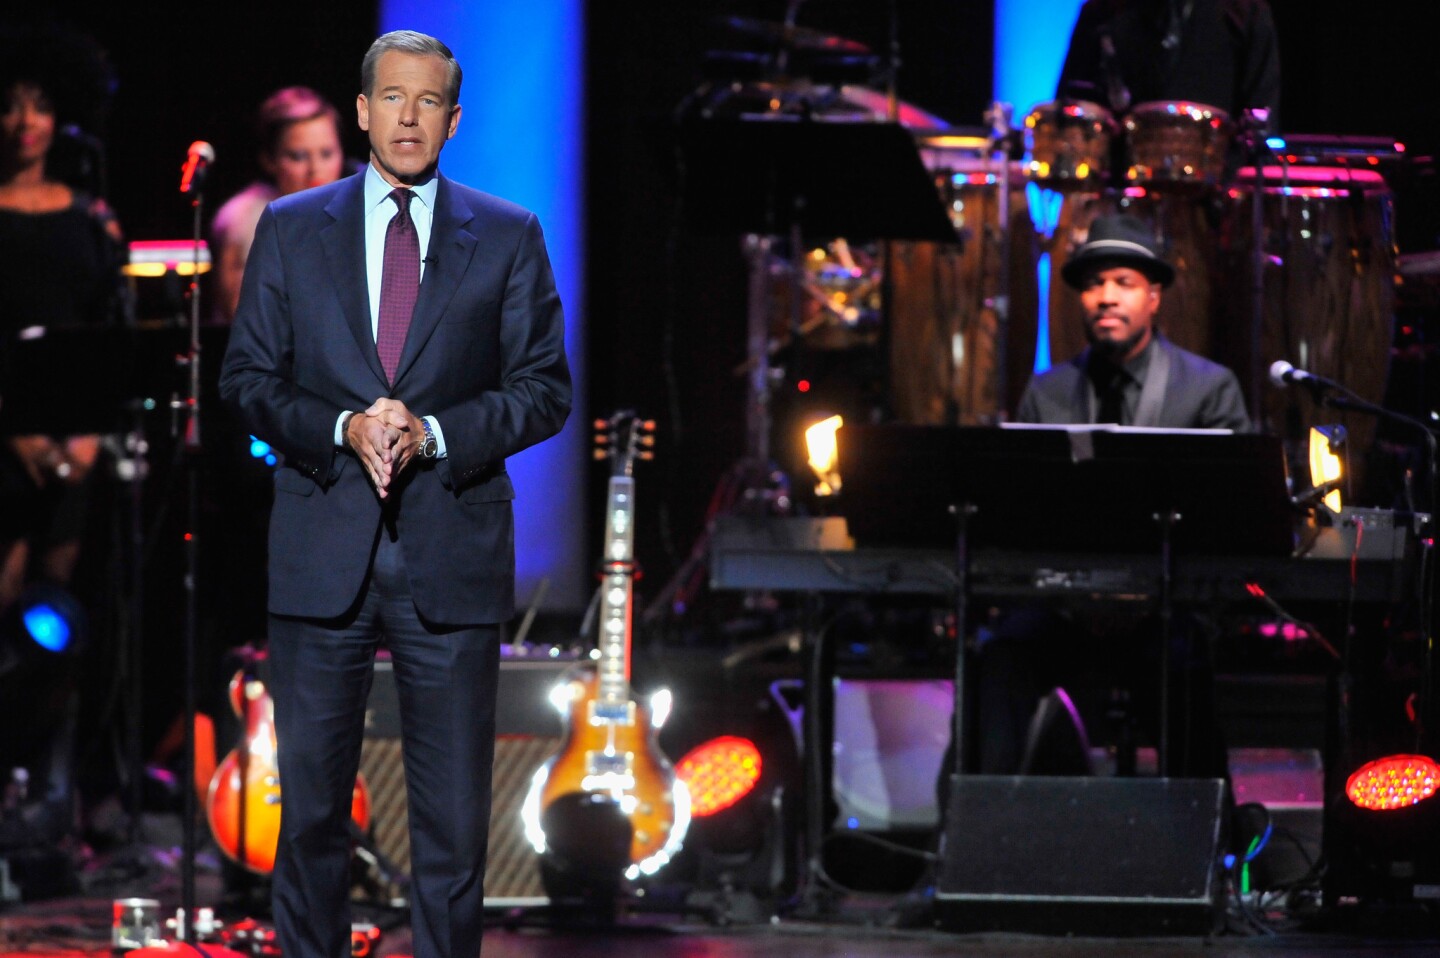 NBC News anchor Brian Williams hosts the Lincoln Awards: A Concert for Veterans and the Military Family at the Kennedy Center in Washington, D.C., on Jan. 7, 2015.